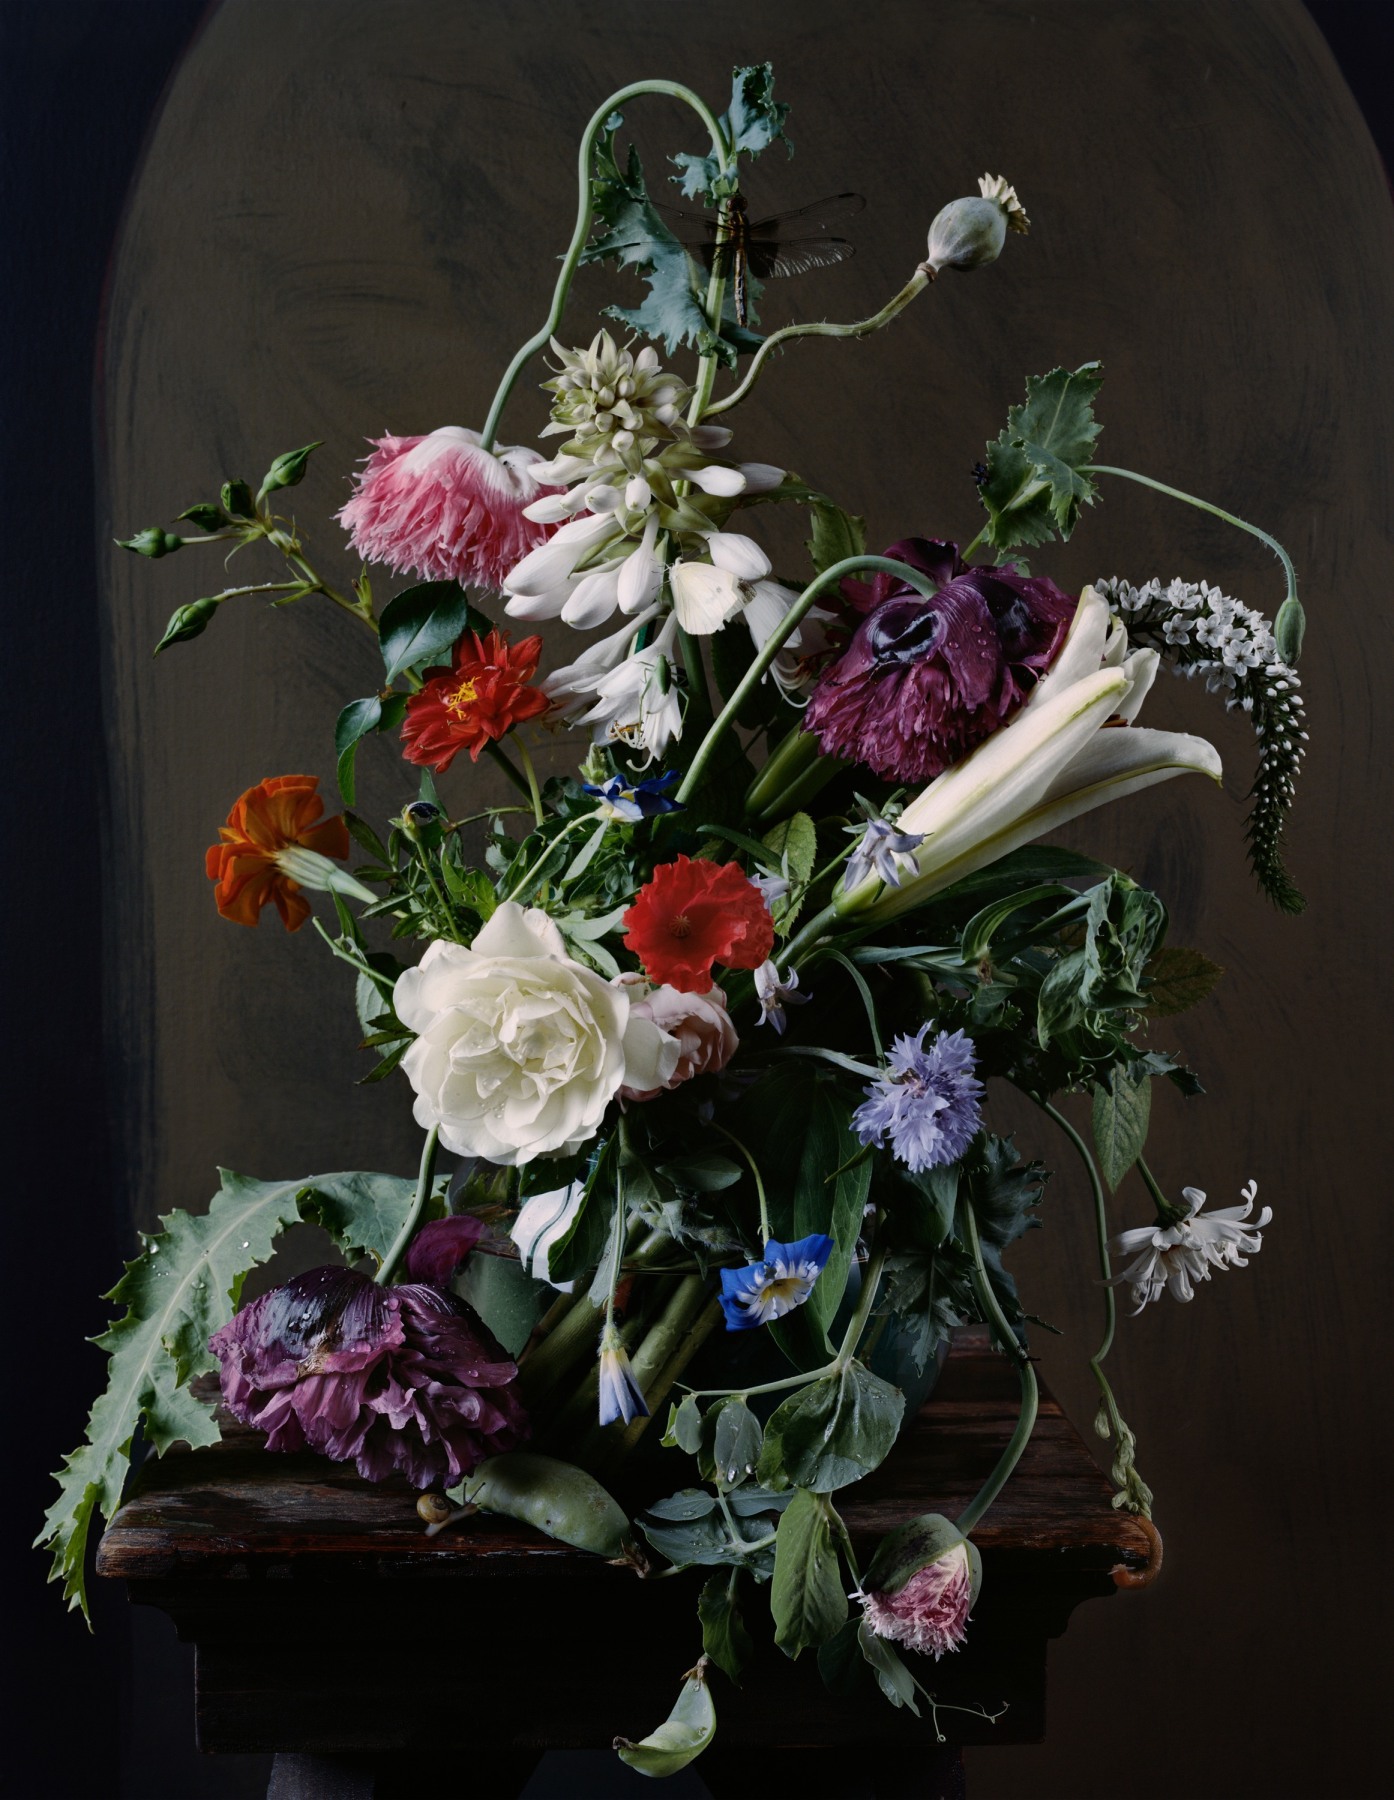 Photograph by Sharon Core titled 1720 from the series 1606-1907 of a floral still life arranged in the style of a classical painting